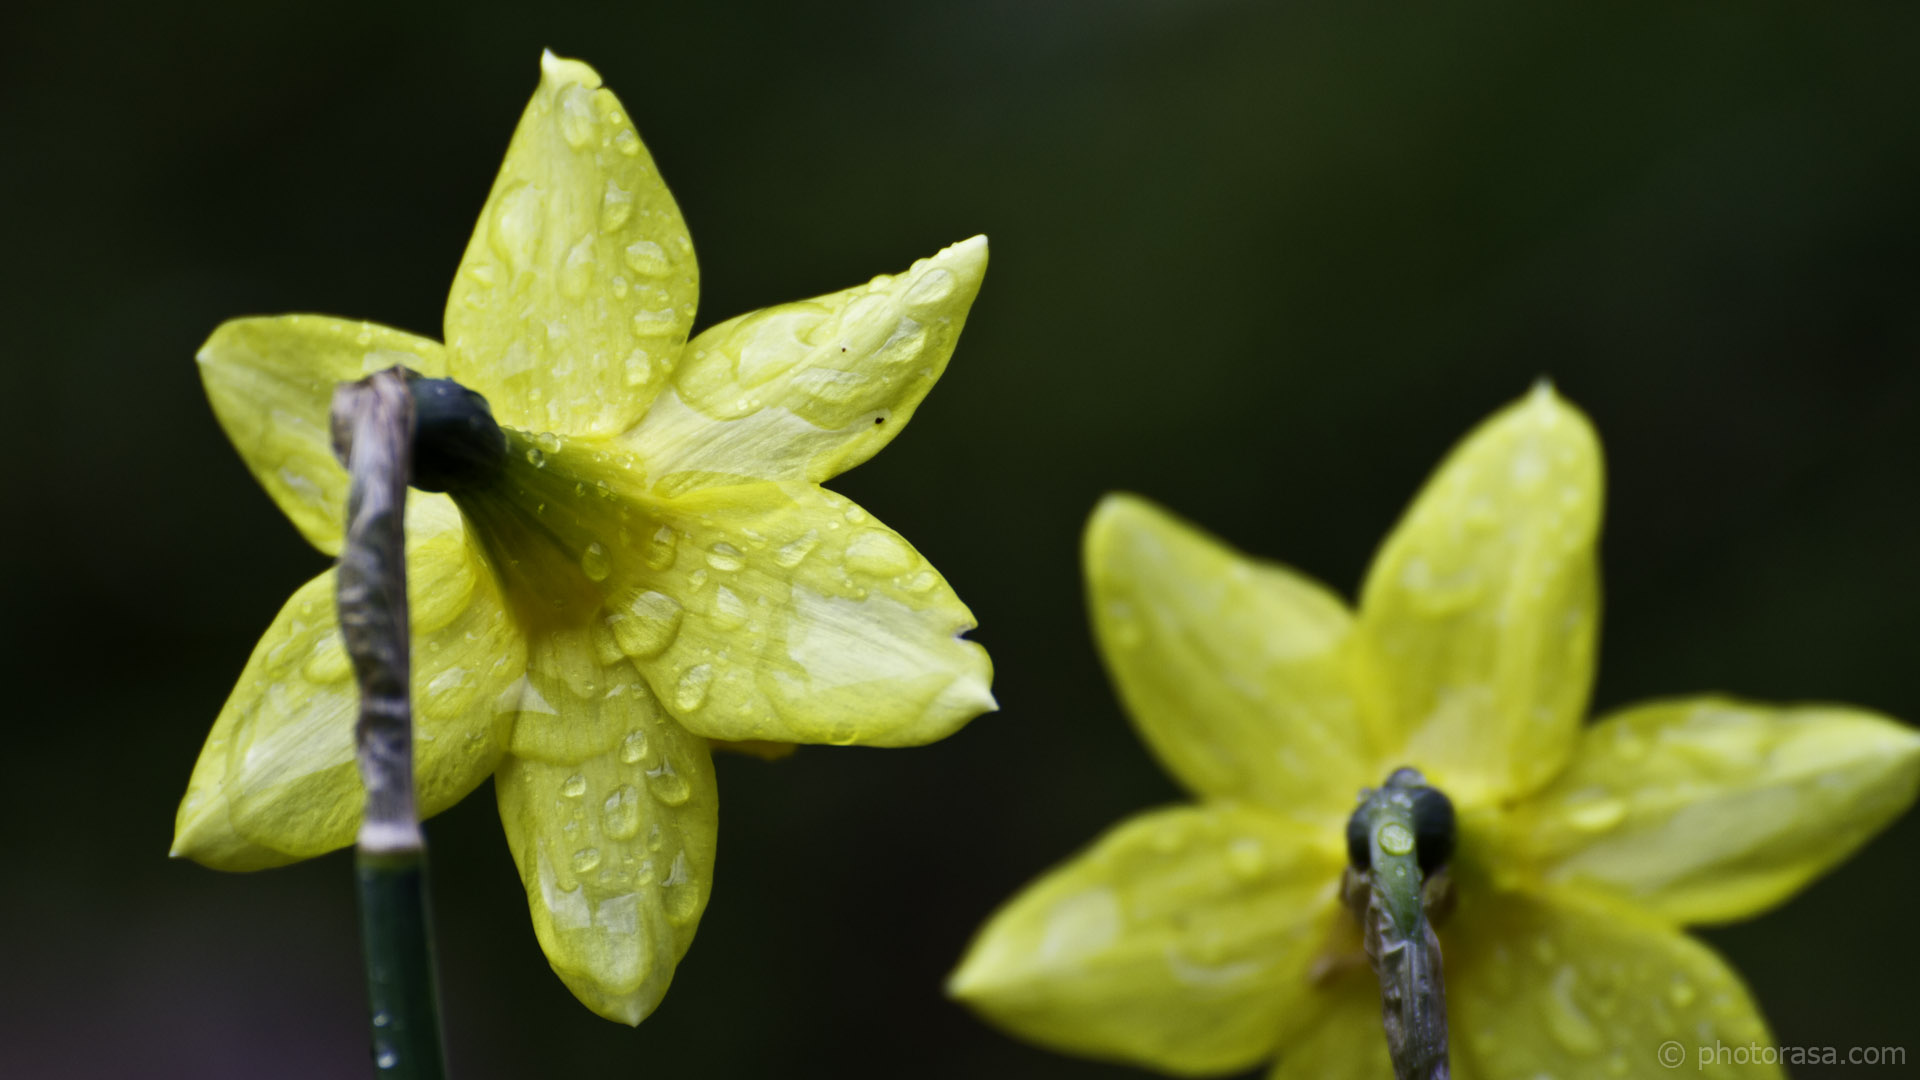 water droplets on back of daffodil